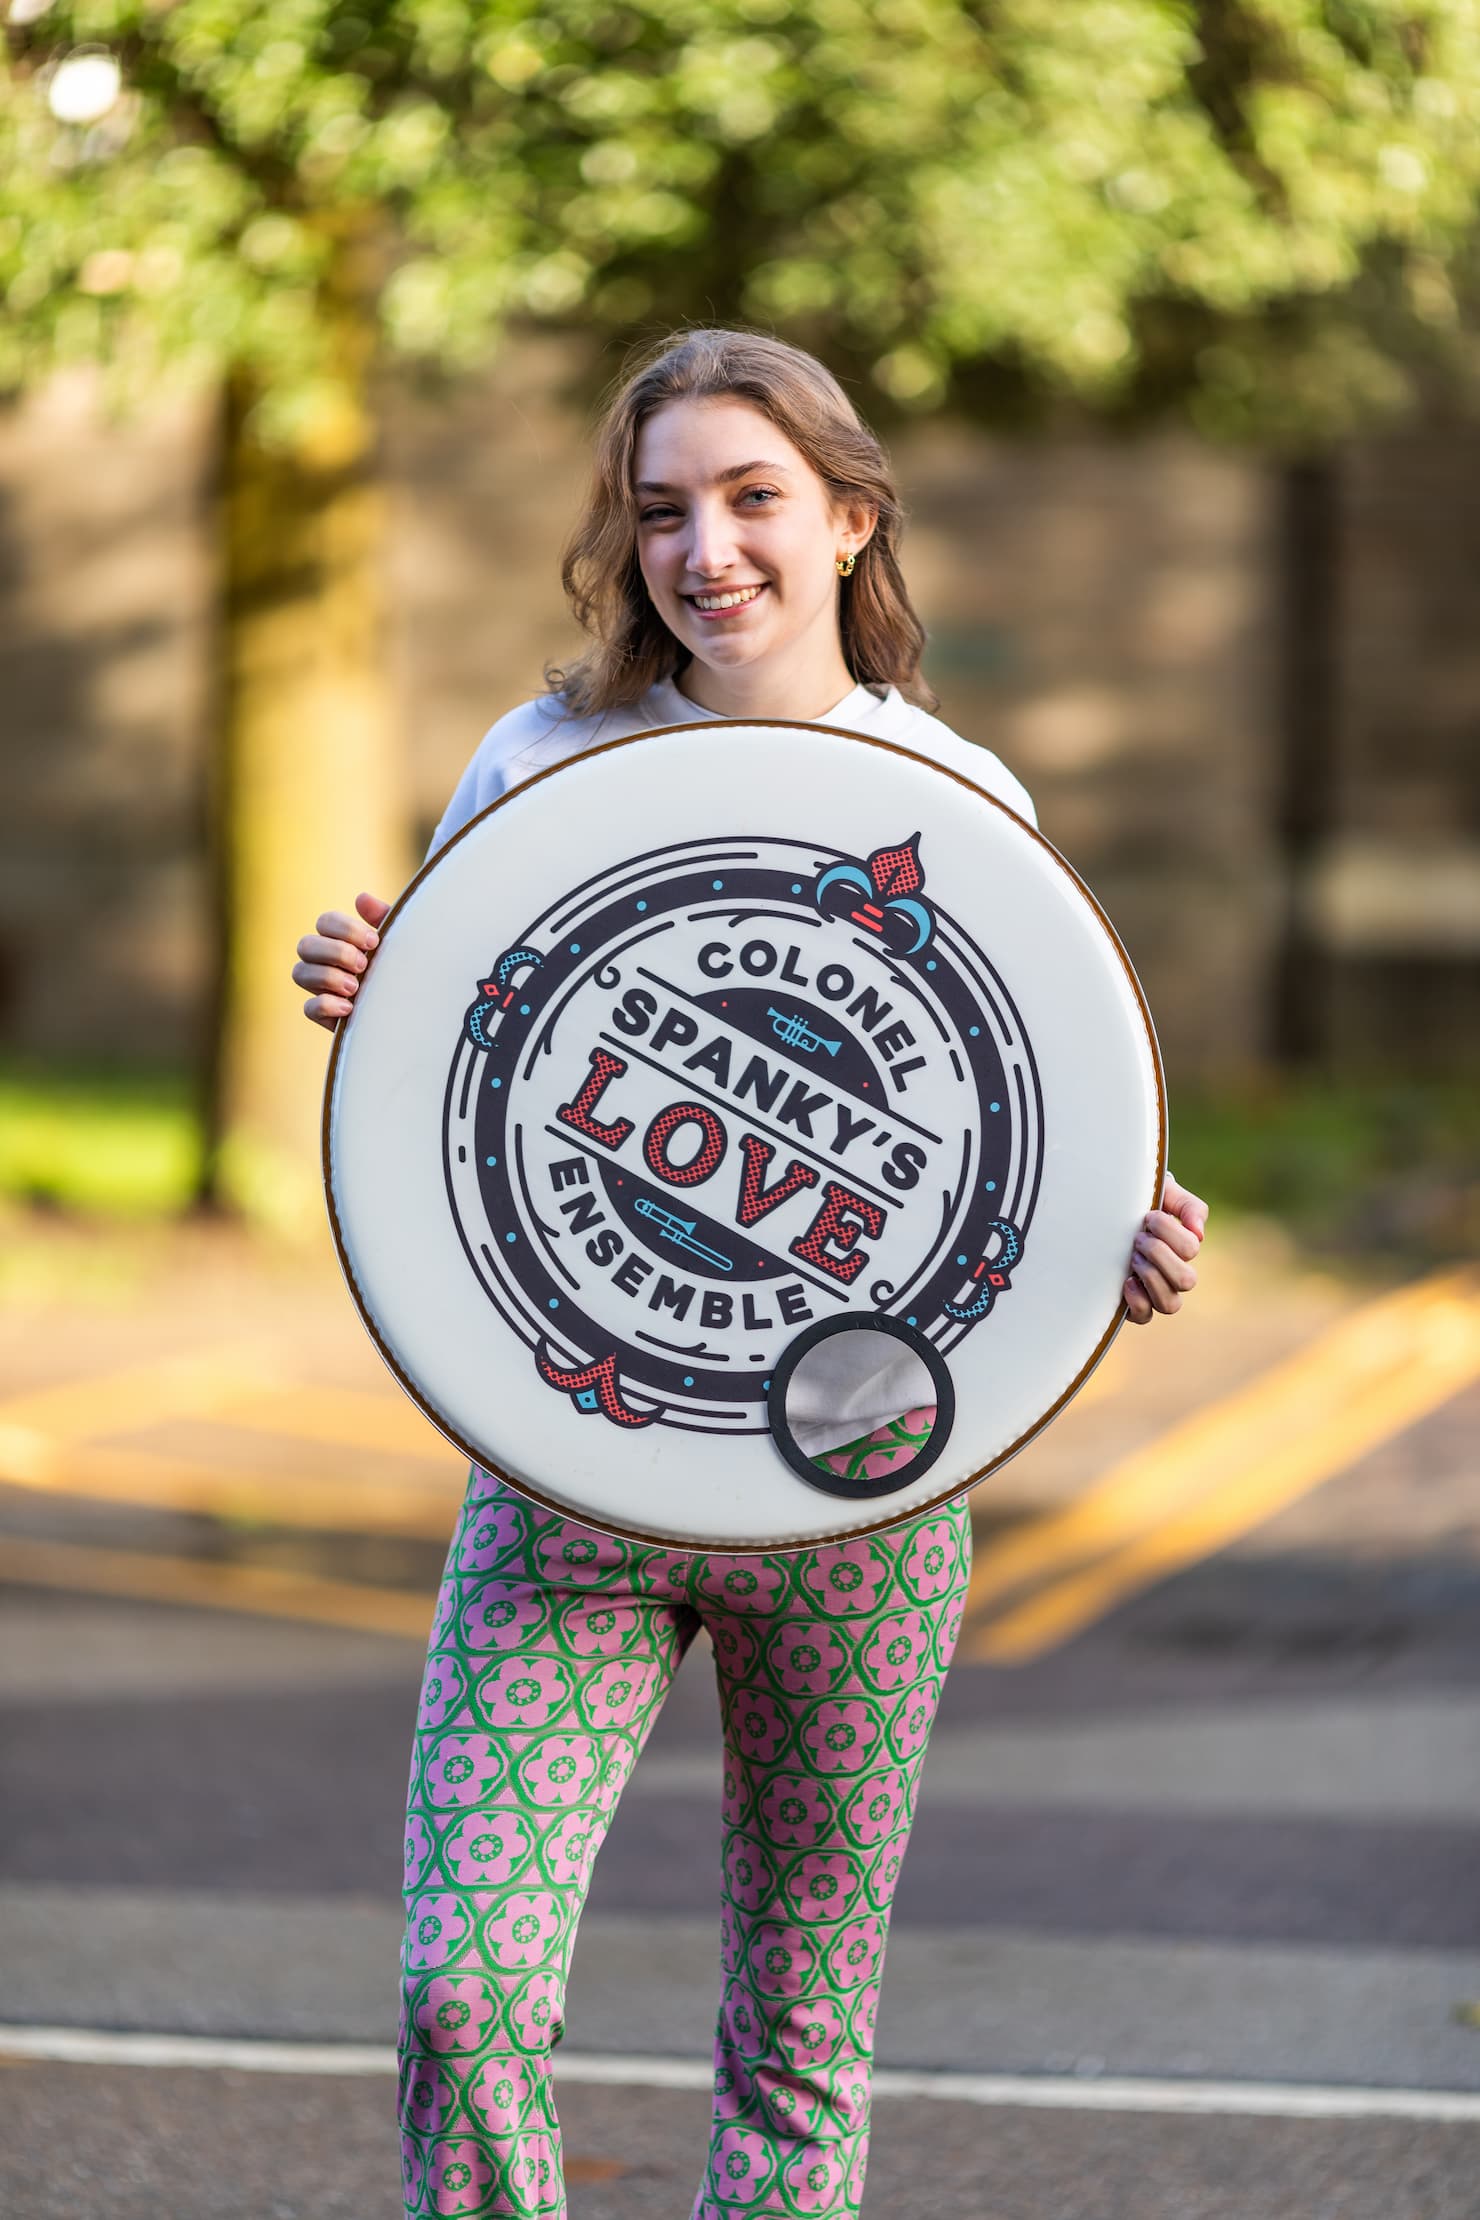 Zoe holding the Colonel Spanky's logo on a drum skin